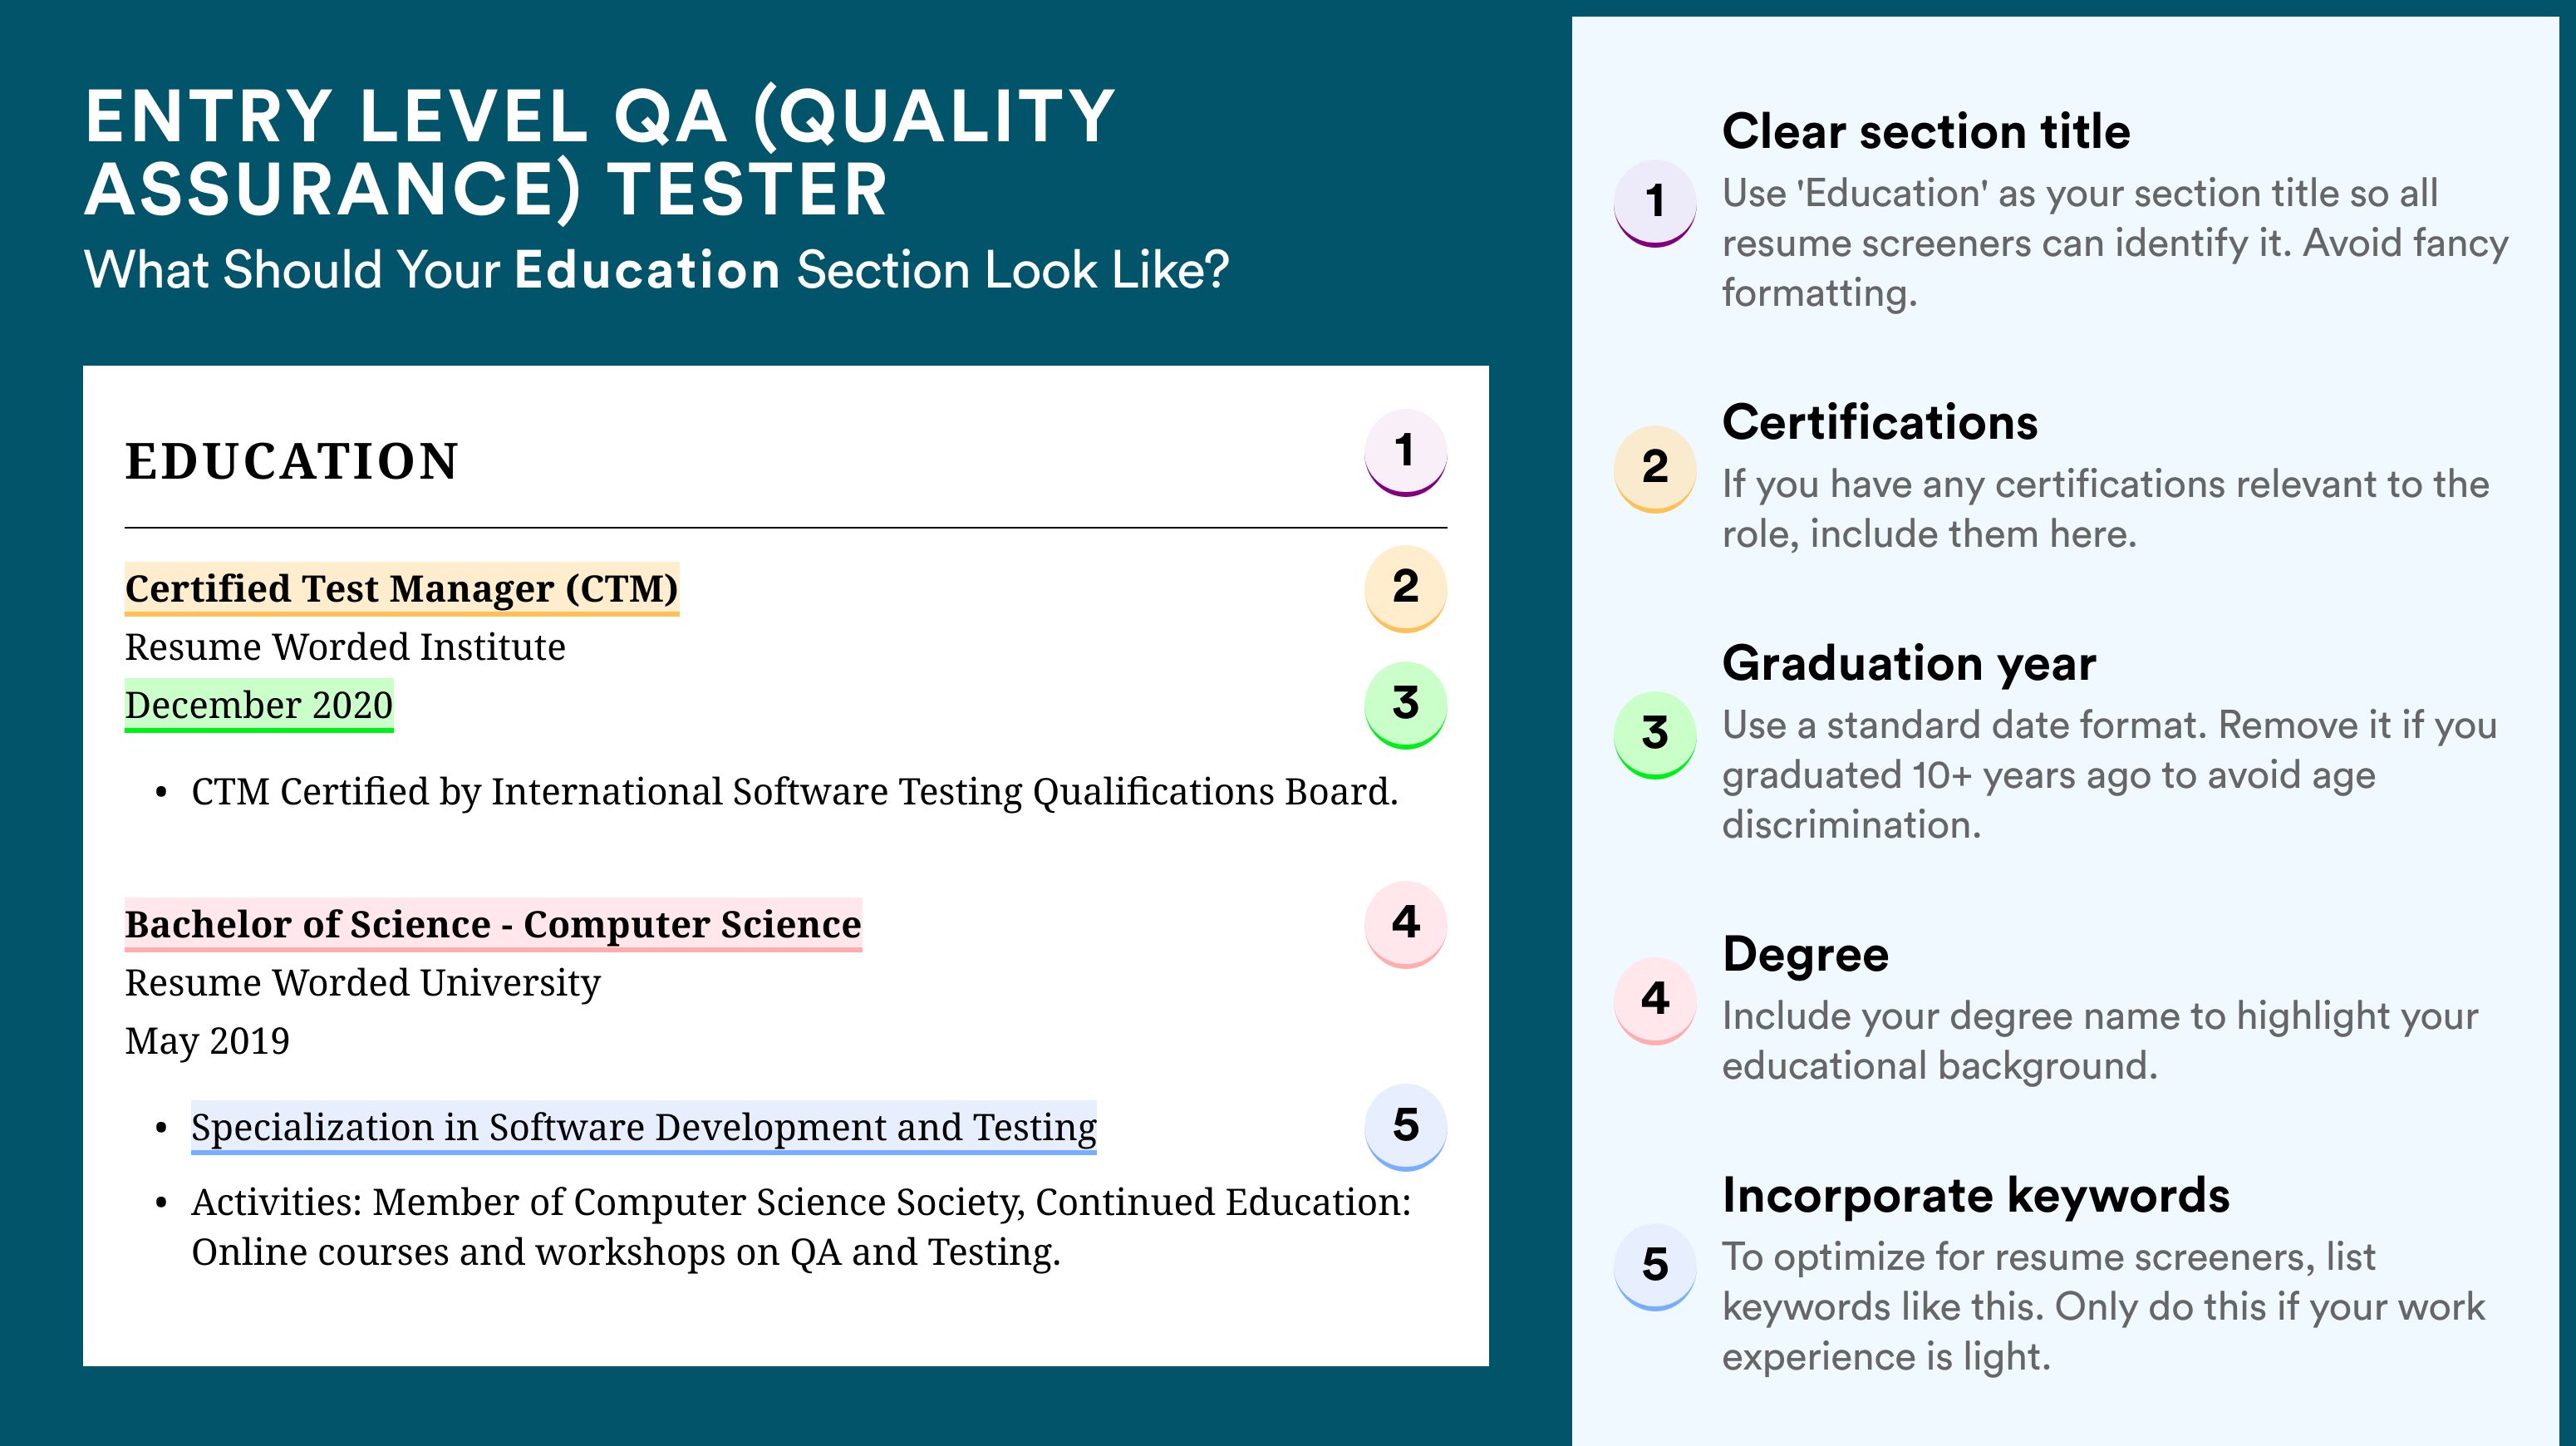 How To Write An Education Section - Entry Level QA (Quality Assurance) Tester Roles